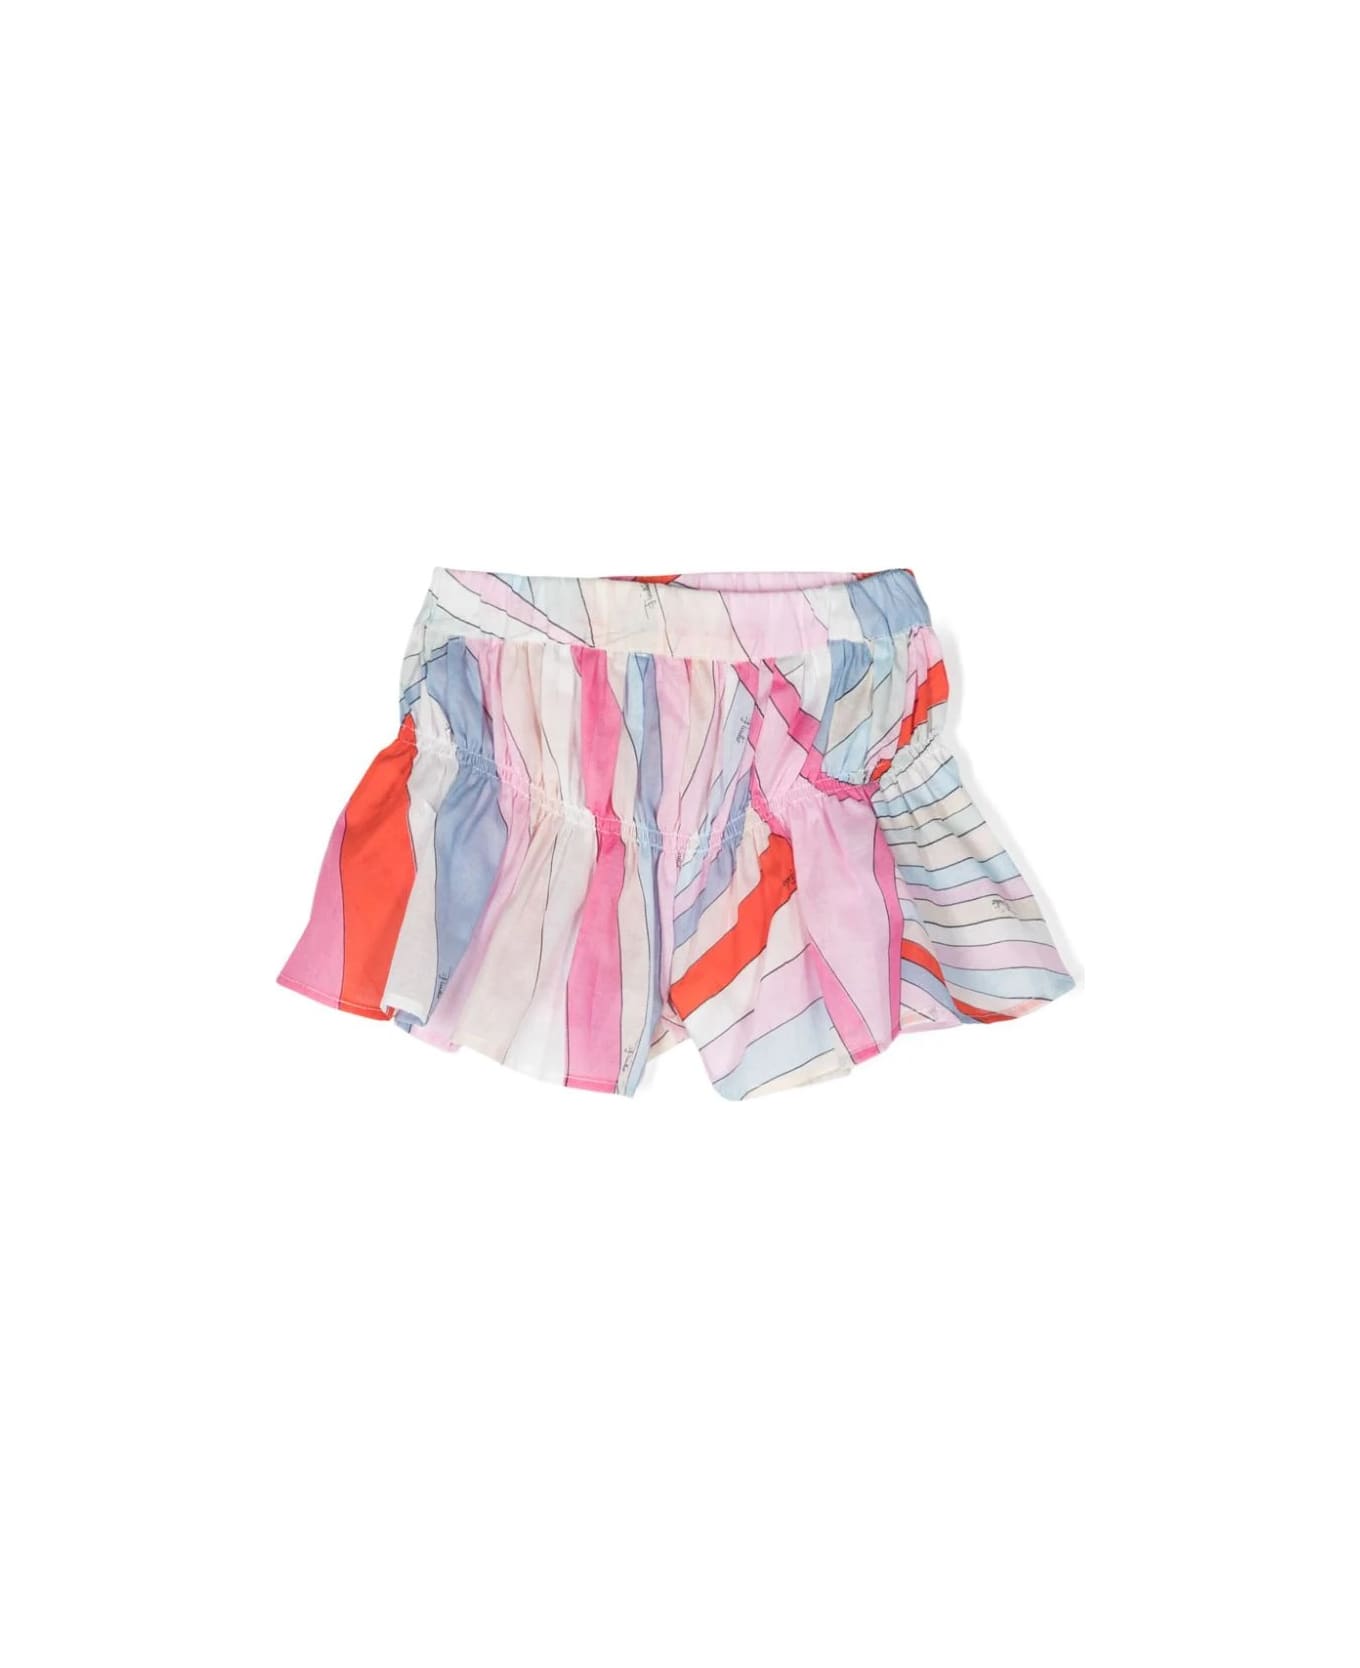 Pucci Flared Shorts With Light Blue/multicolour Iride Print - Blue